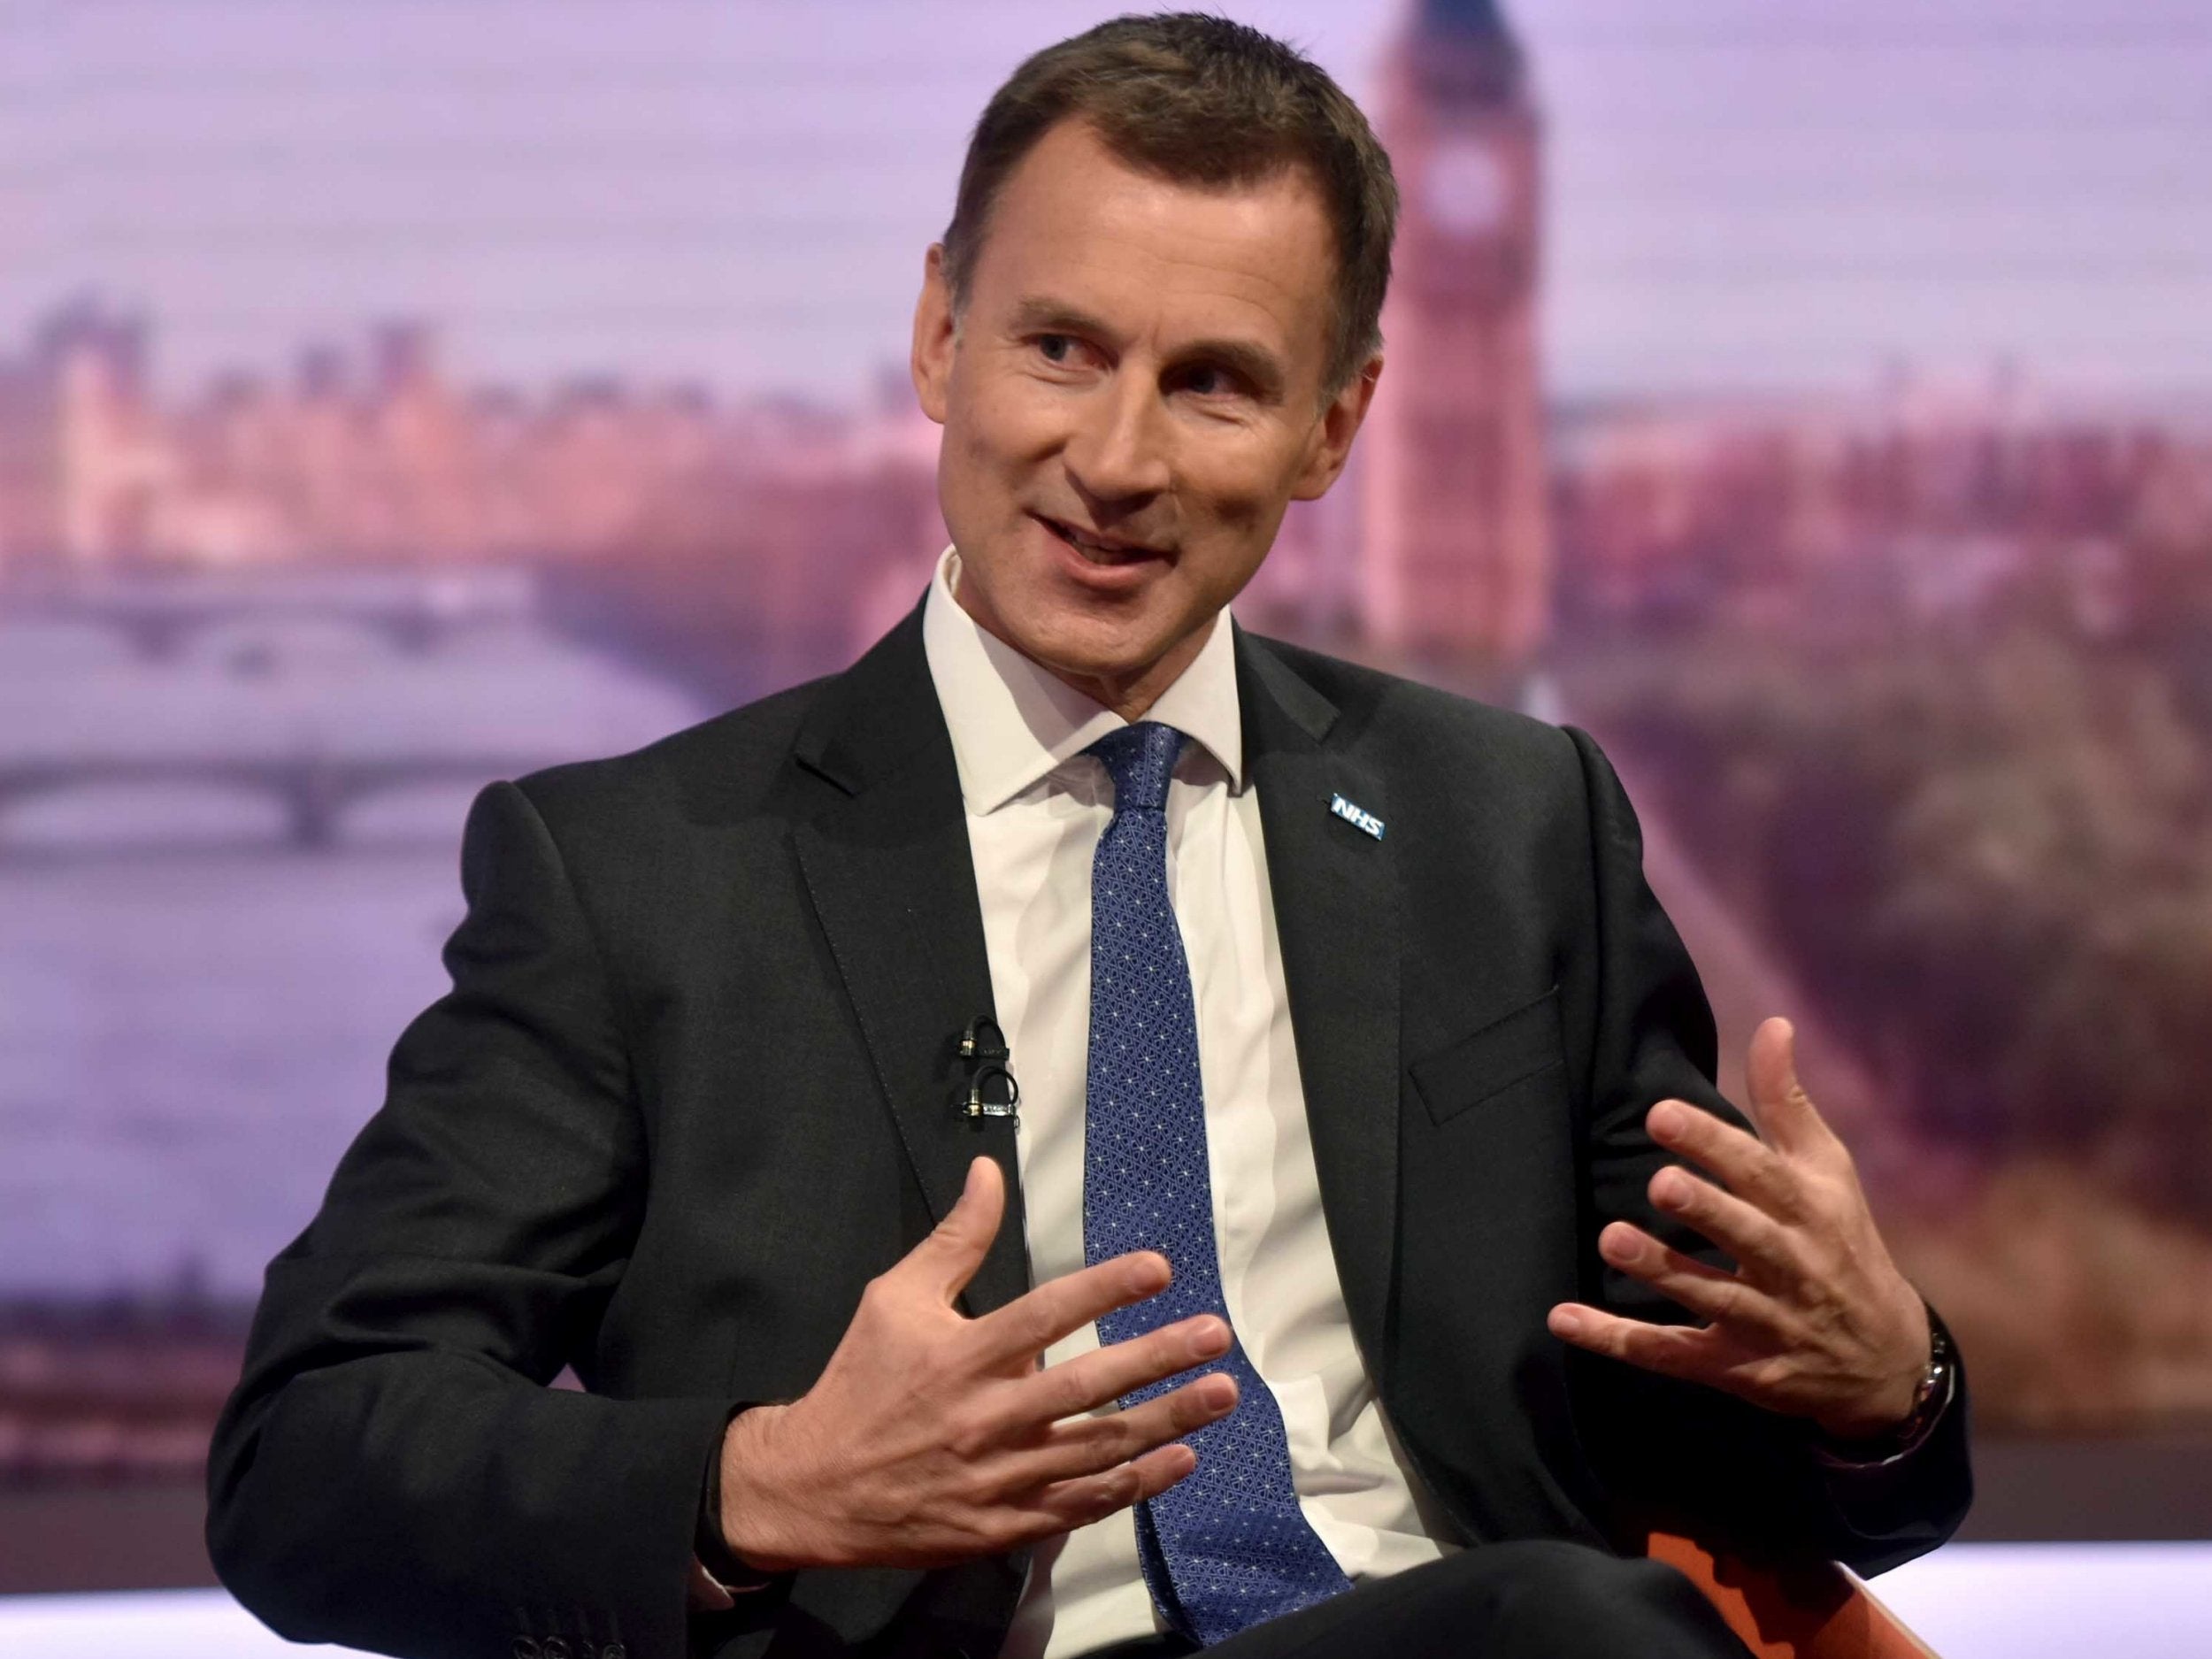 Health Secretary Jeremy Hunt has criticised businesses for speaking out over Brexit